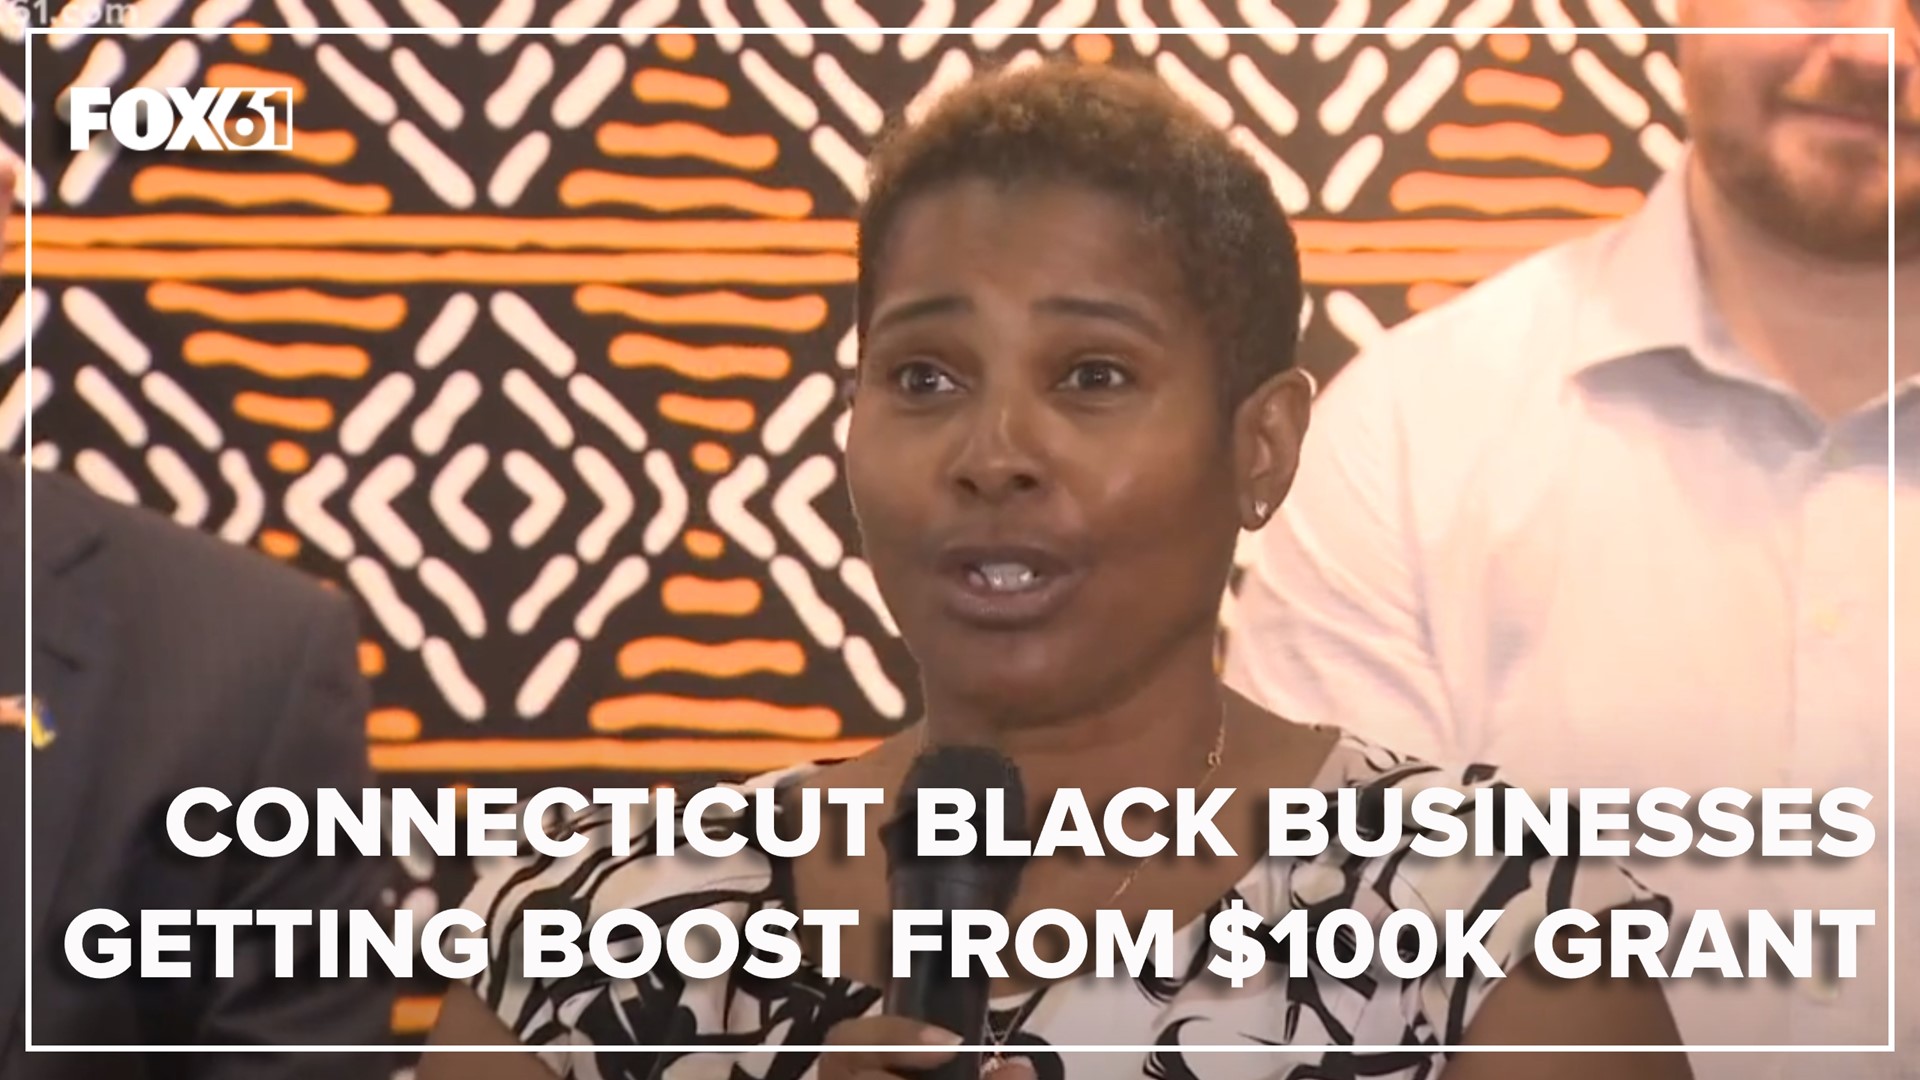 The grant went to the Black Business Alliance which helps other businesses with funding and resources.